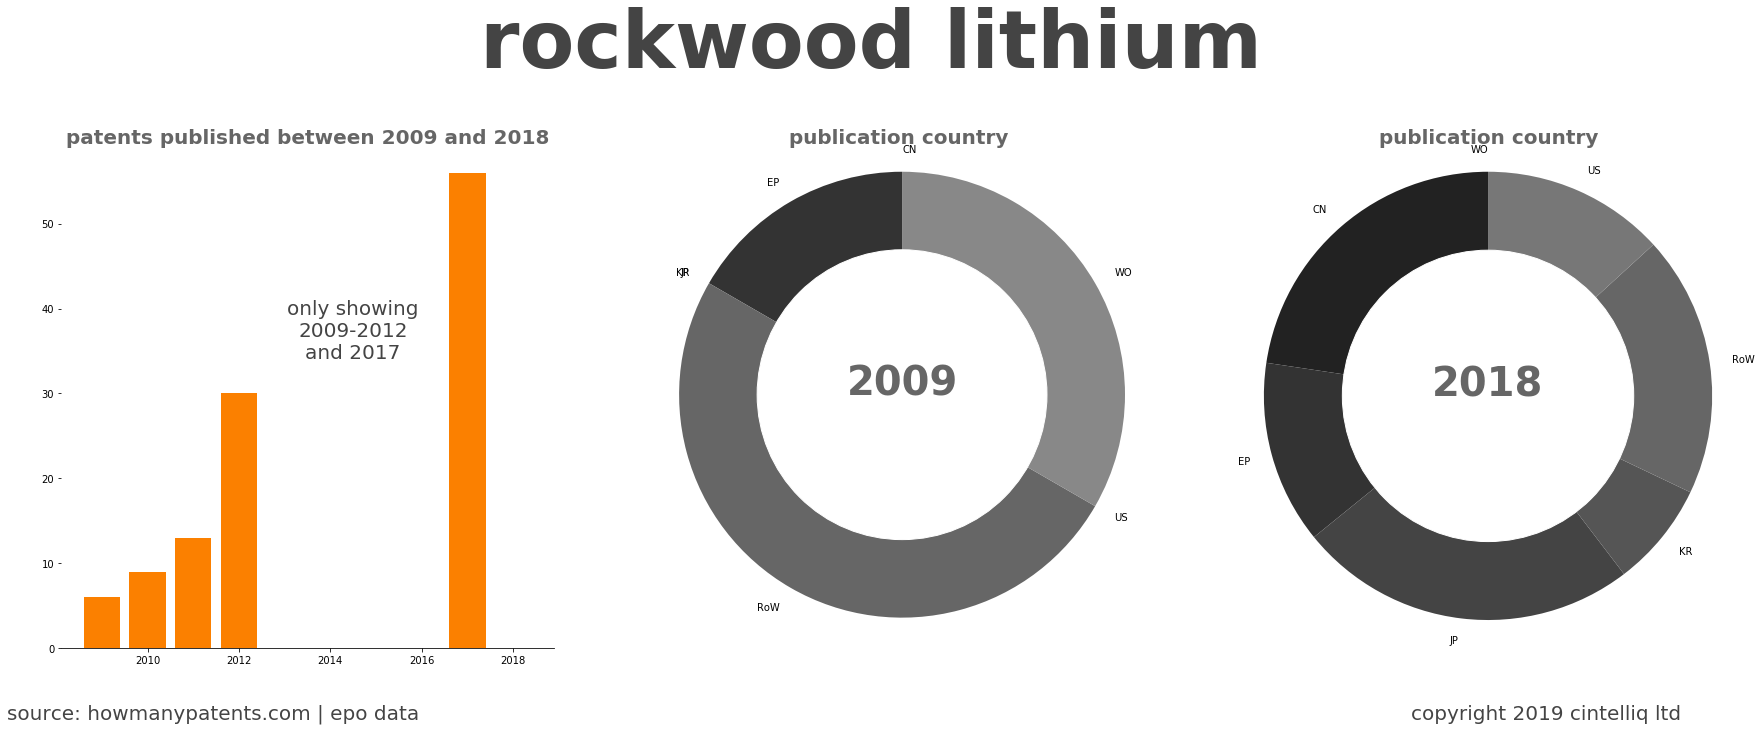 summary of patents for Rockwood Lithium